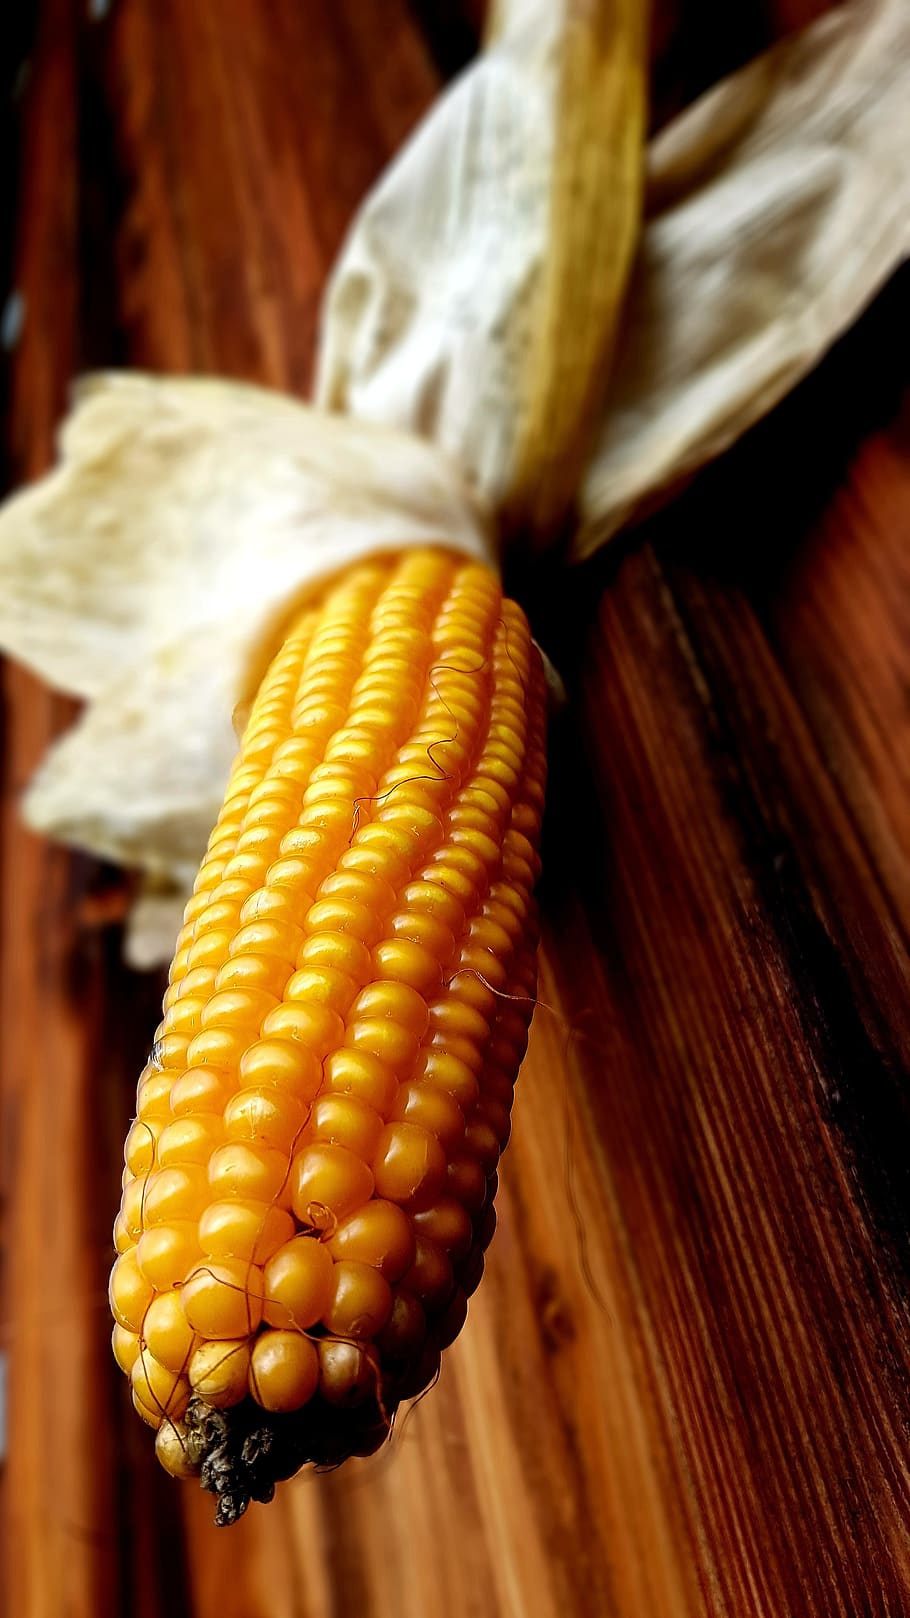 corn, corn on the cob, yellow, ripe, involucral bracts, wooden wall, food and drink, food, close-up, wellbeing